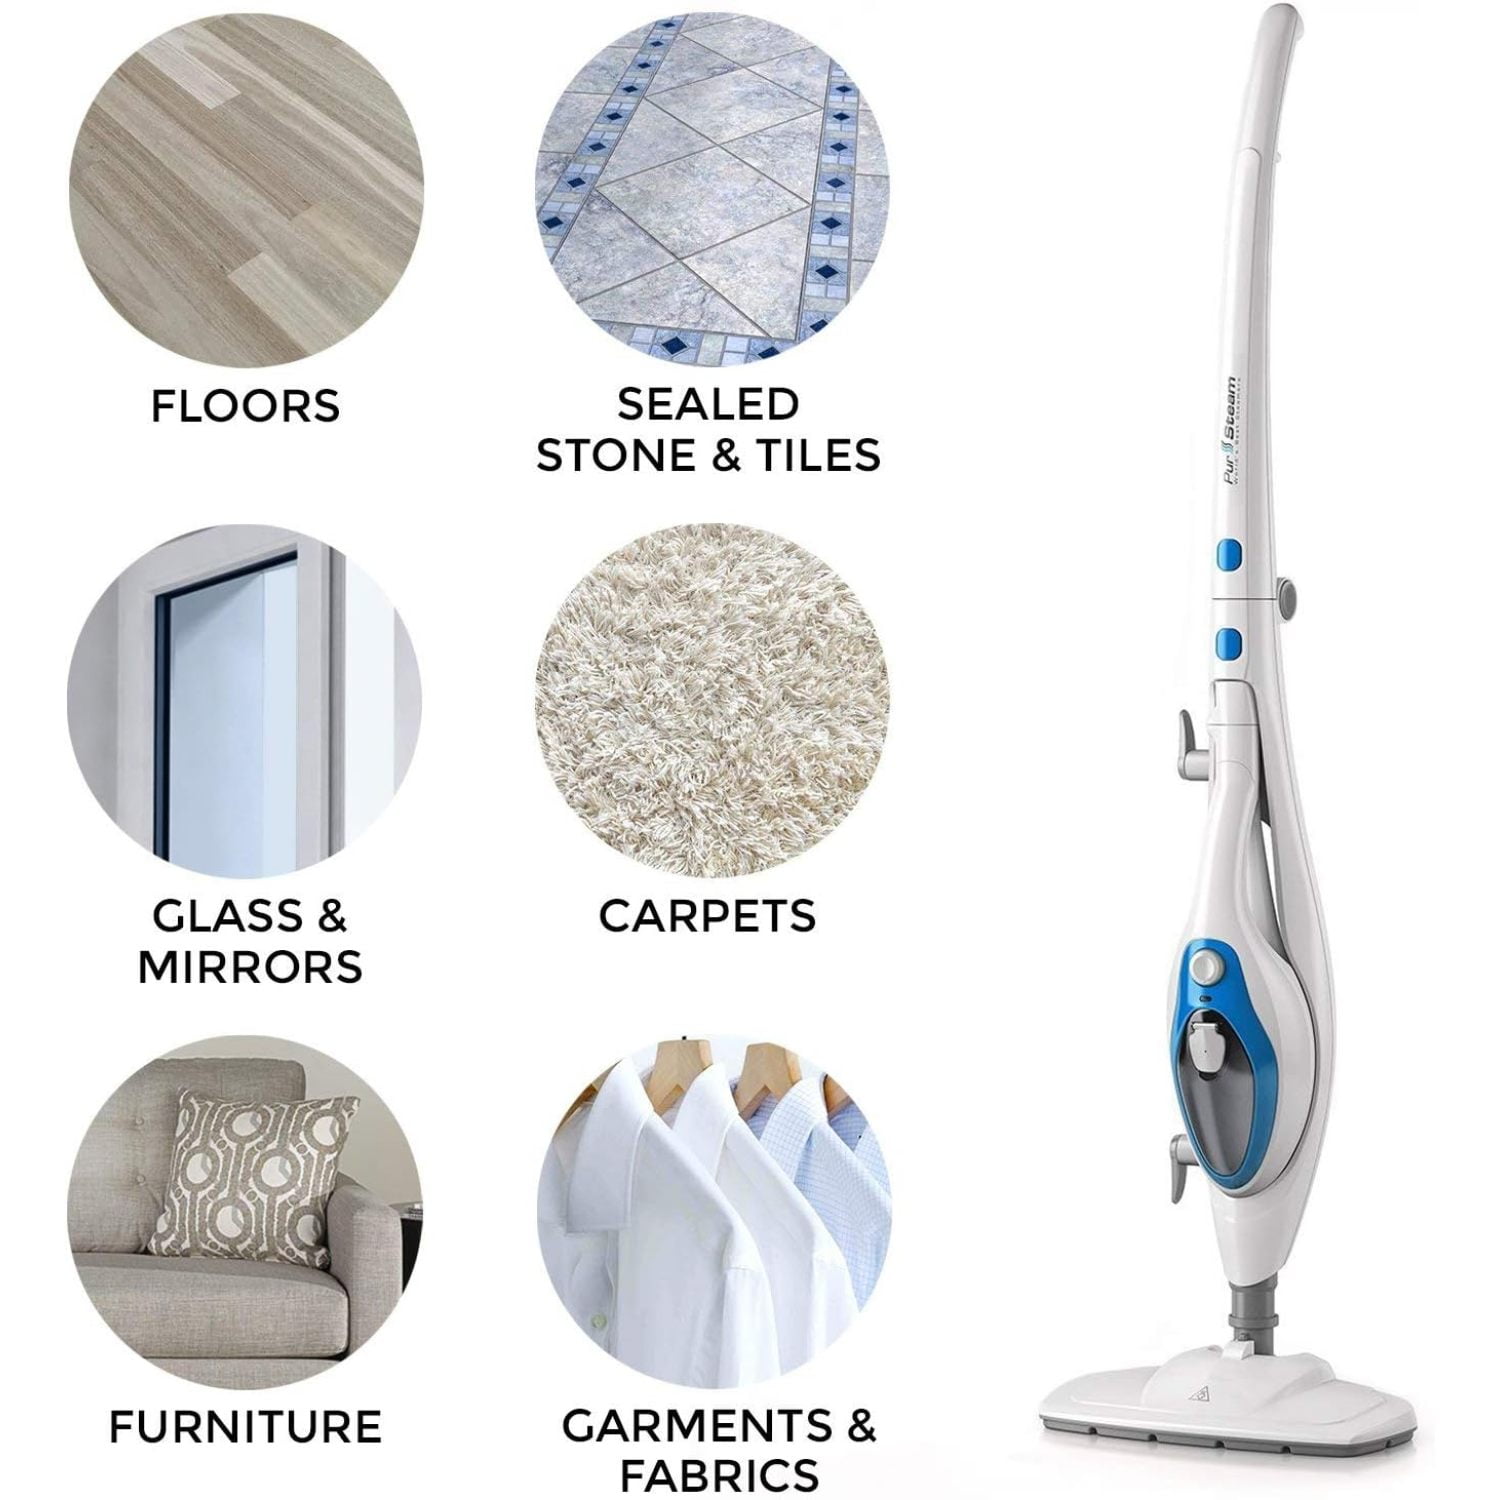 Secura Steam Mop 10-in-1 Convenient Detachable Steam Cleaner, White Multifunctional  Cleaning Machine Floor Steamer with 3 Microfiber Mop Pads - The Secura